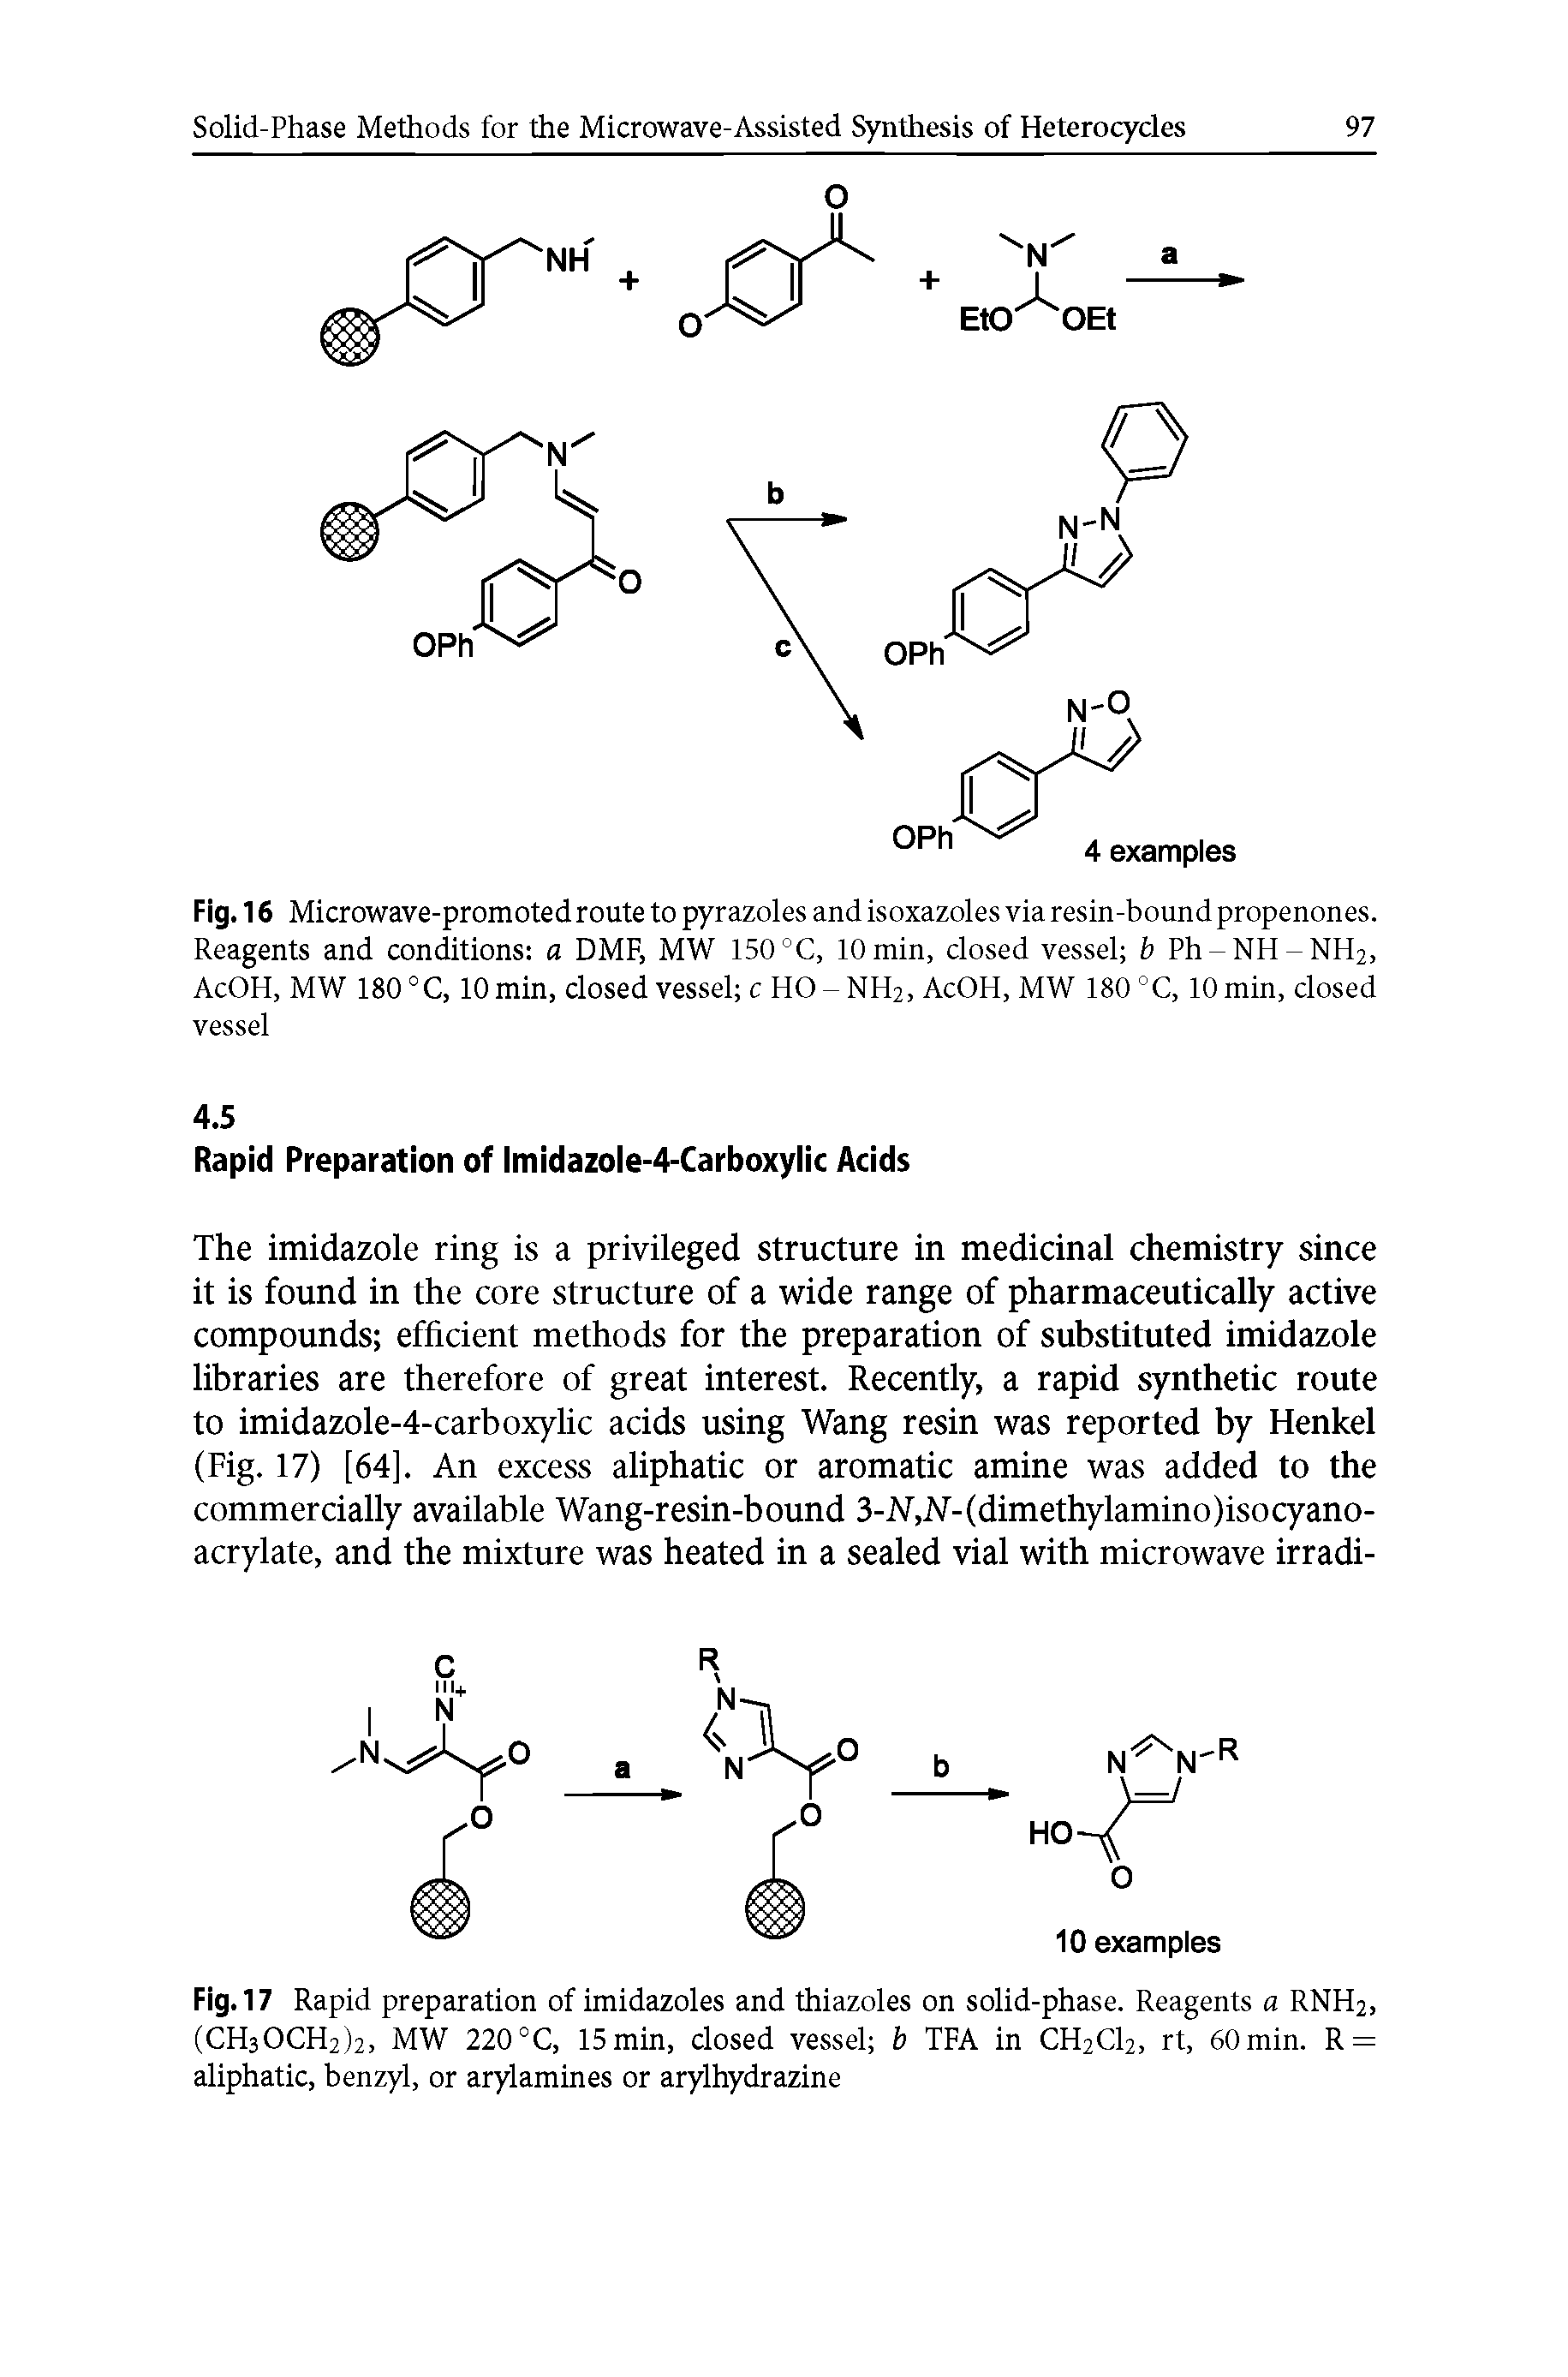 Fig. 16 Microwave-promoted route to pyrazoles and isoxazoles via resin-bound propenones. Reagents and conditions a DMF, MW 150 °C, 10 min, closed vessel b Ph-NH-NH2, AcOH, MW 180 °C, 10min, closed vessel c HO-NH2, AcOH, MW 180 °C, 10min, closed vessel...